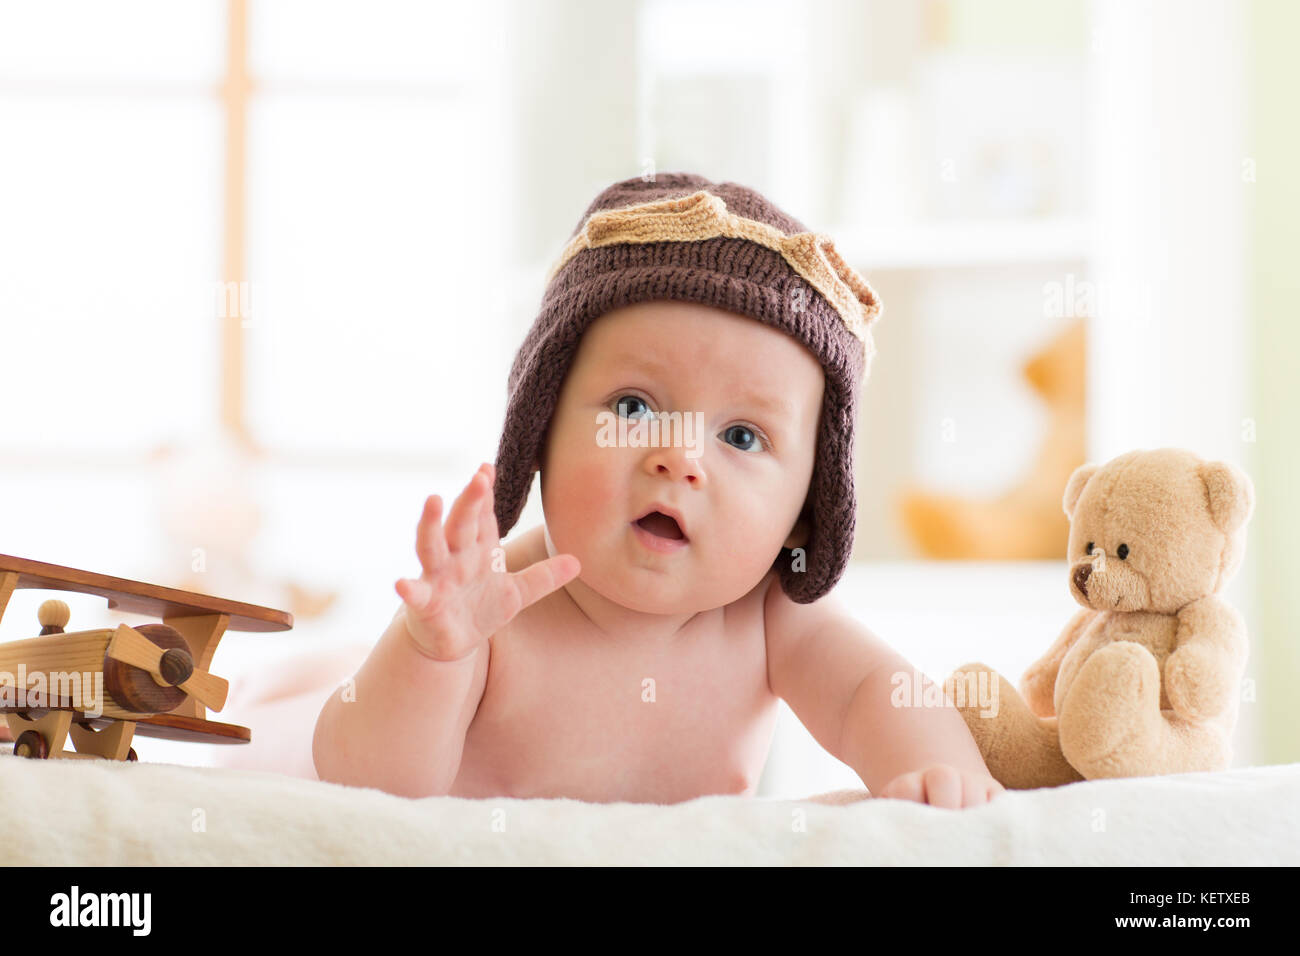 Funny baby boy weared pilot hat with wooden airplanes and teddy bear toys Stock Photo